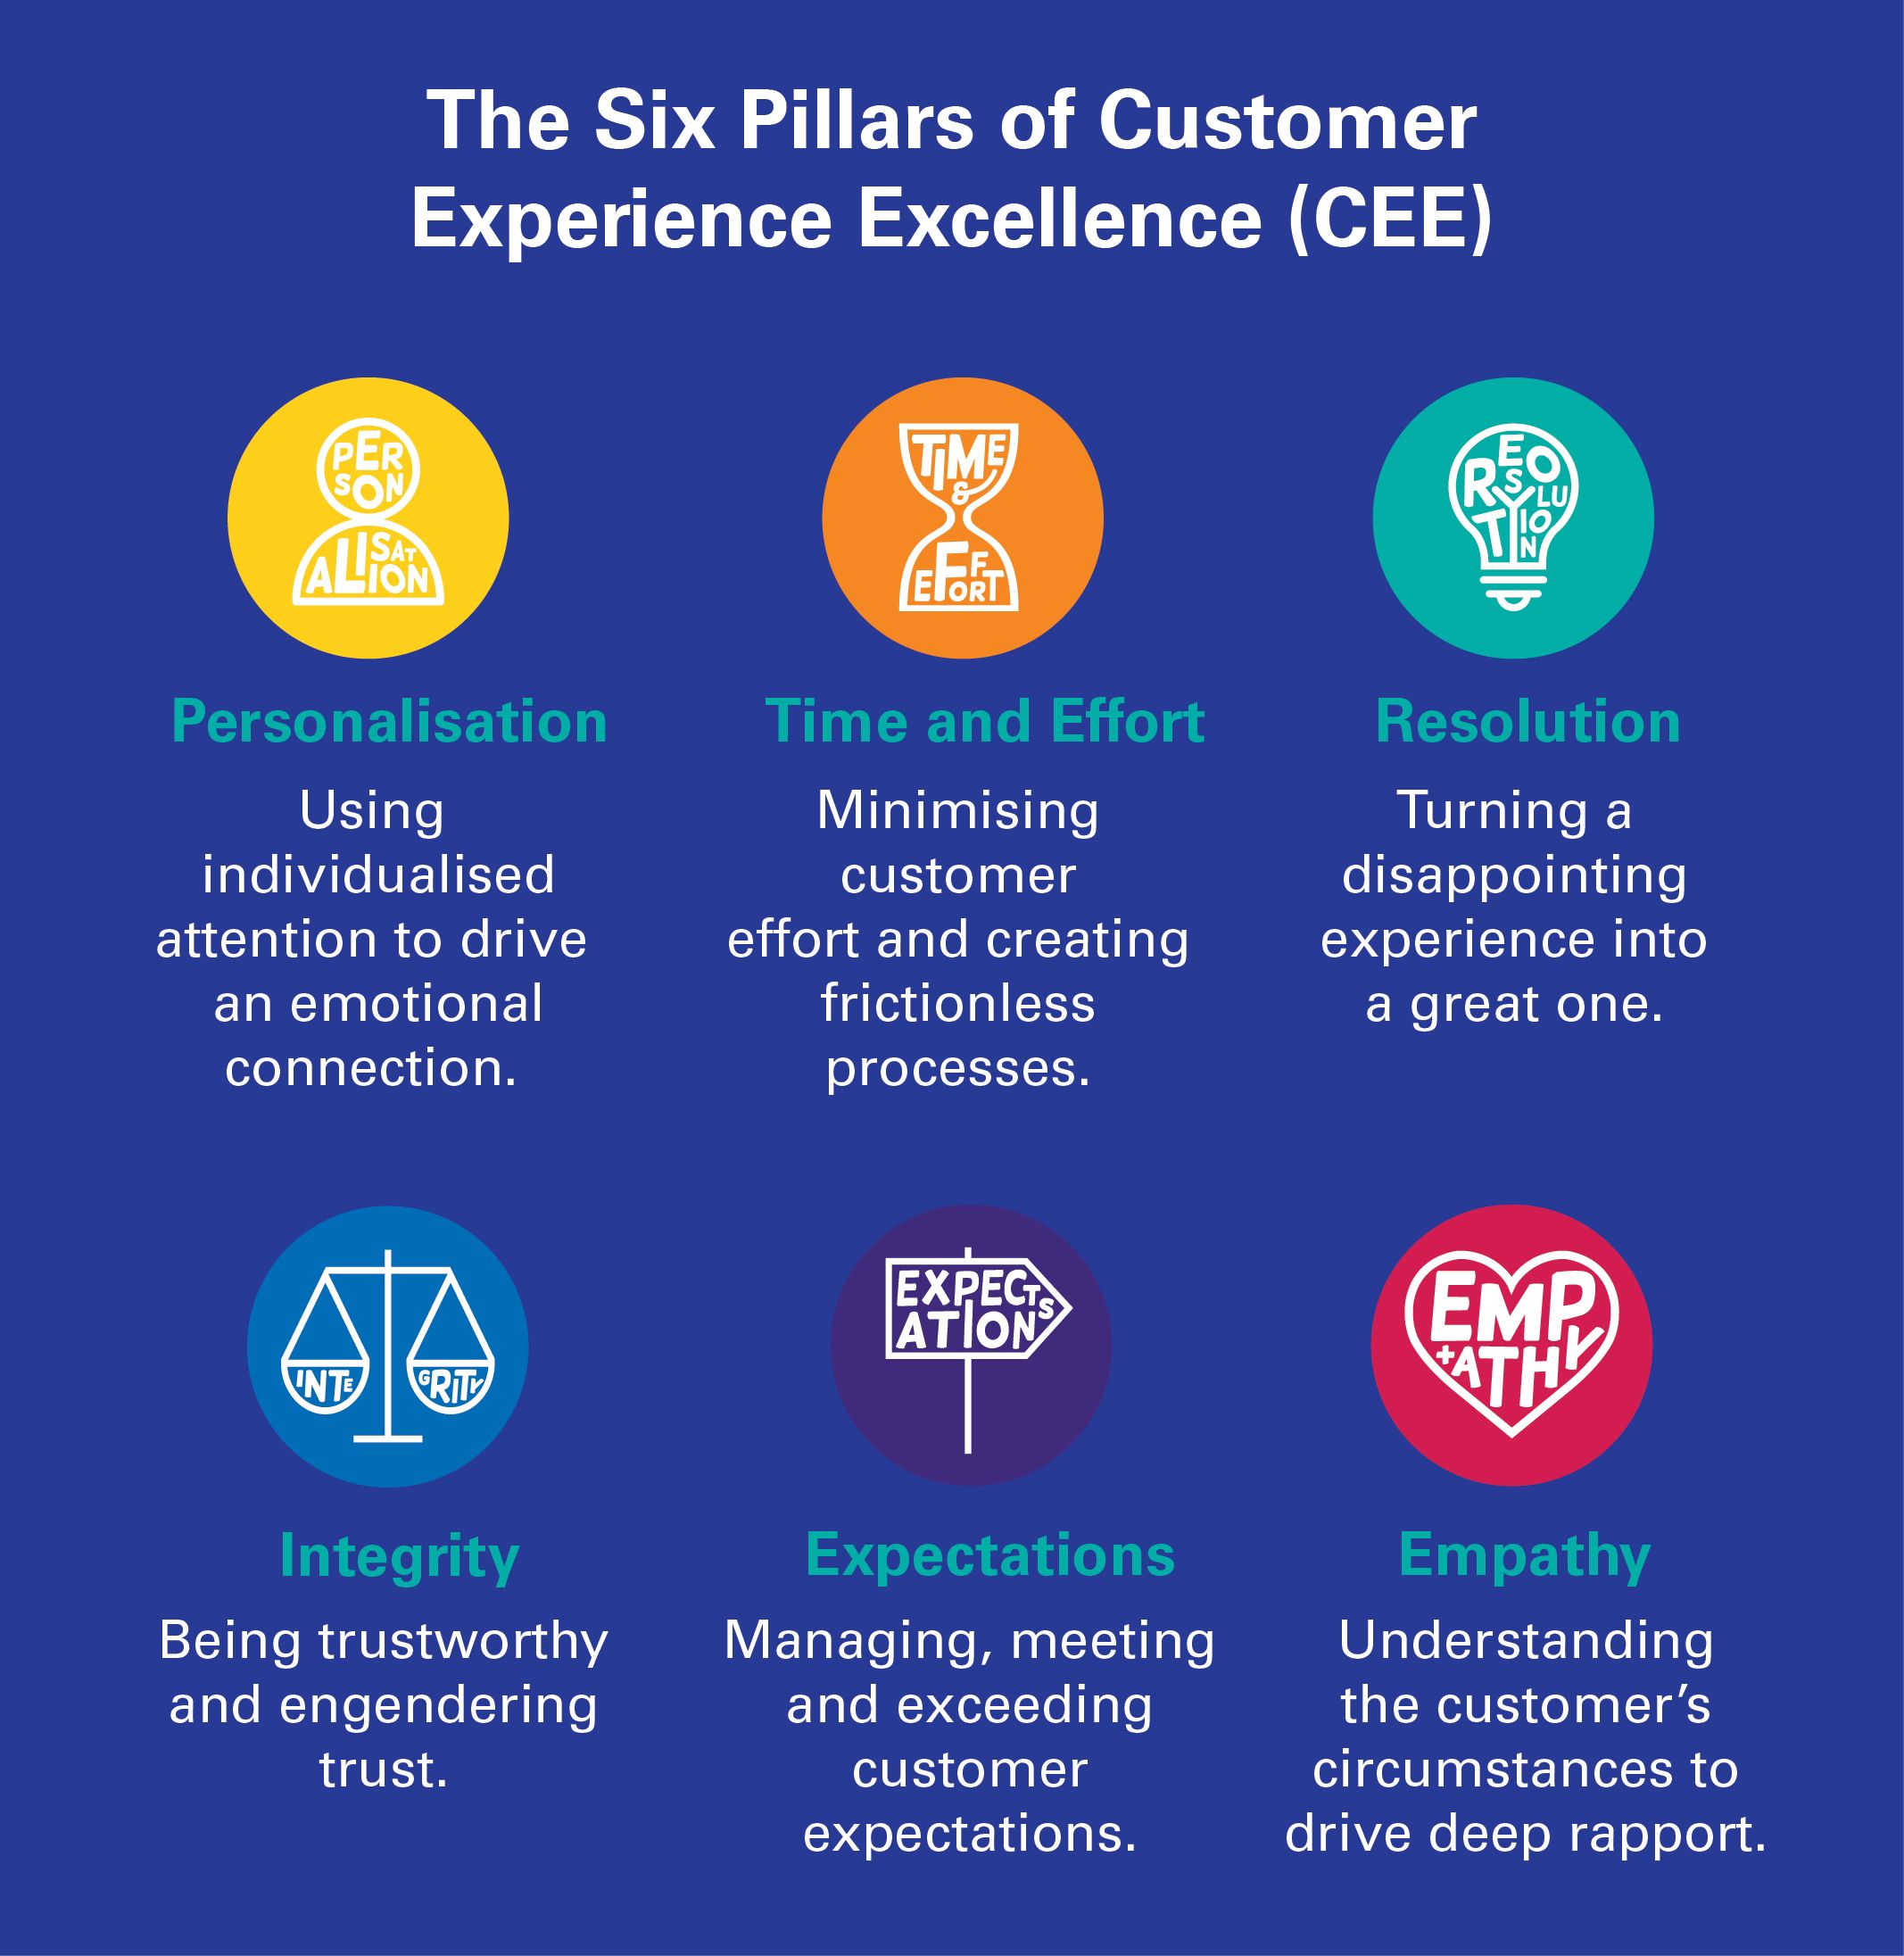 The Six Pillars of Customer Experience Excellence